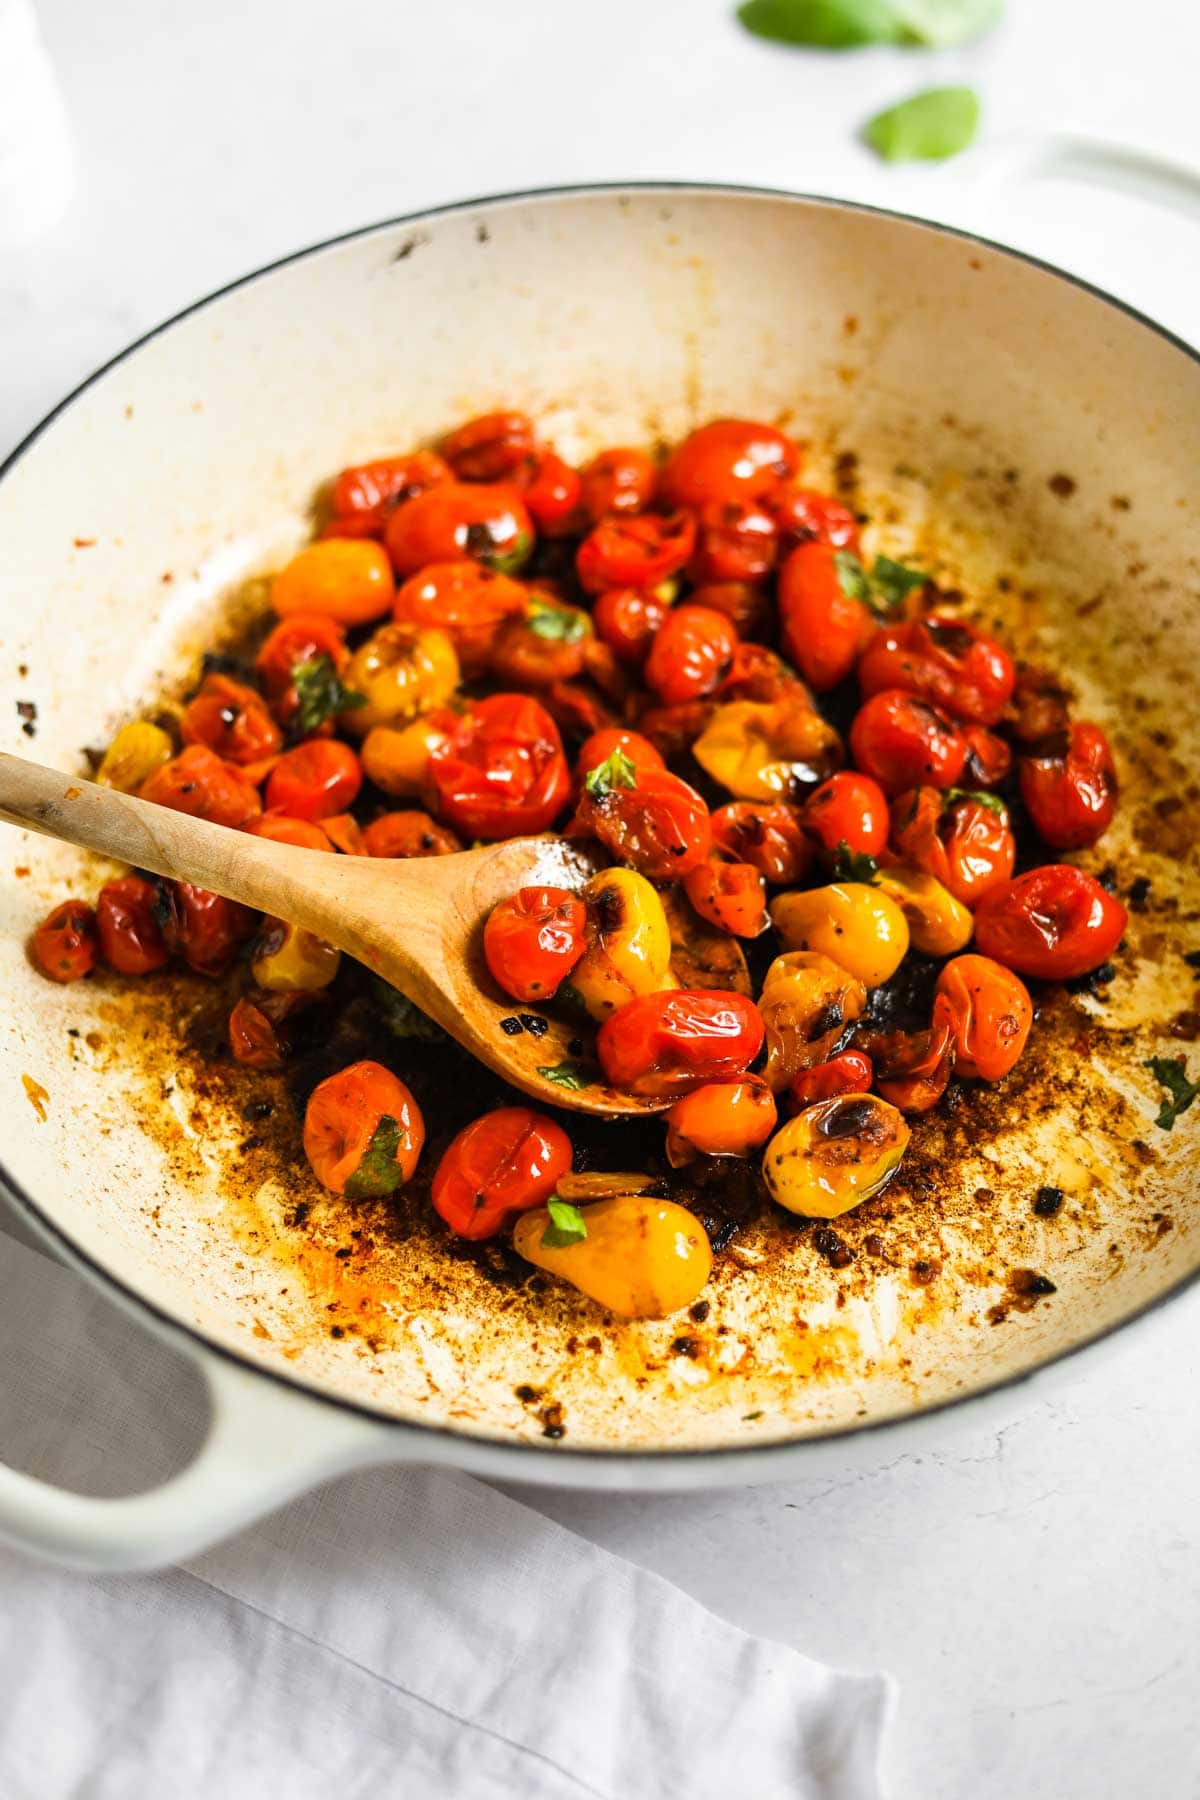 Blistered Cherry Tomatoes with olive wood spoon and Le Creuset White Braiser.